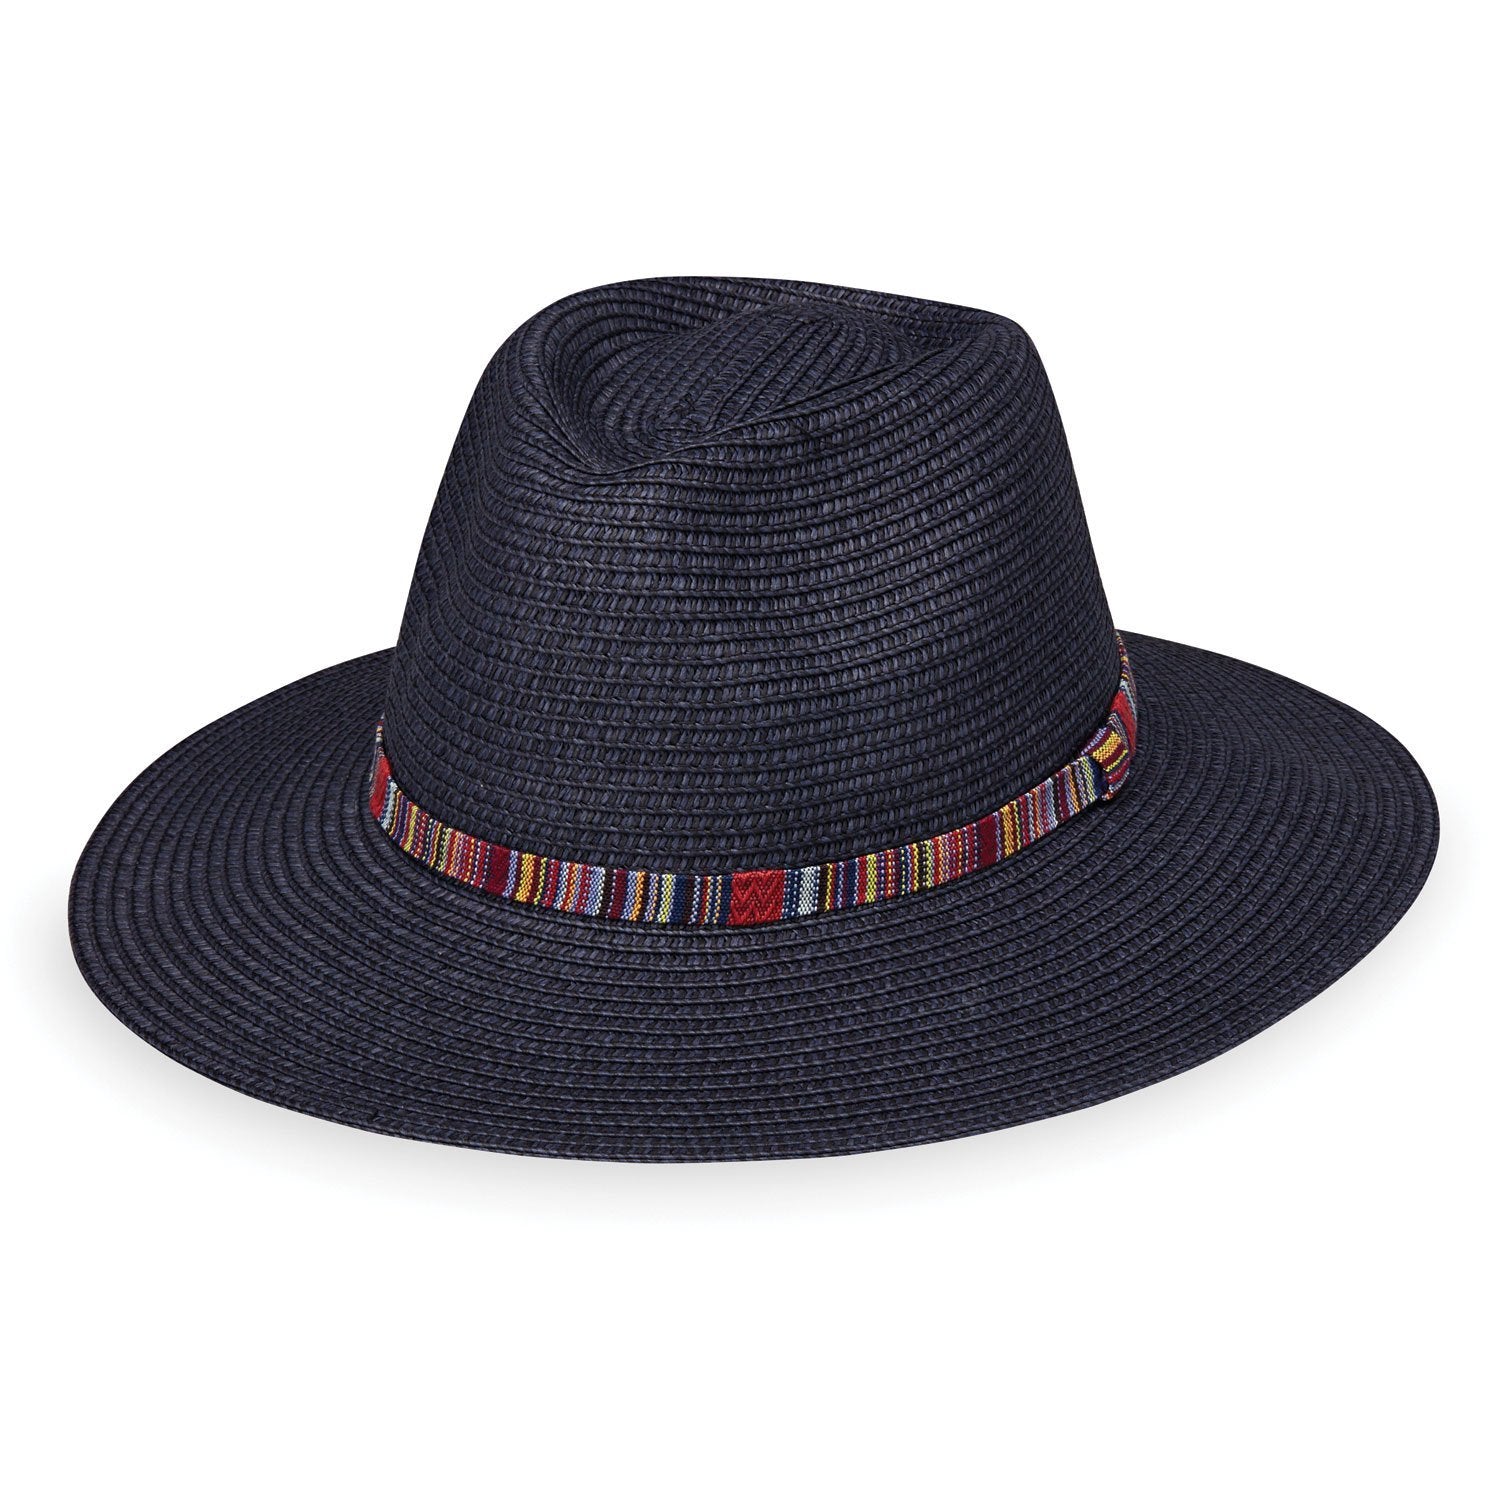 Featuring Front of Unisex Fedora Style Sedona Paper Braid UPF Sun Hat in Navy from Wallaroo